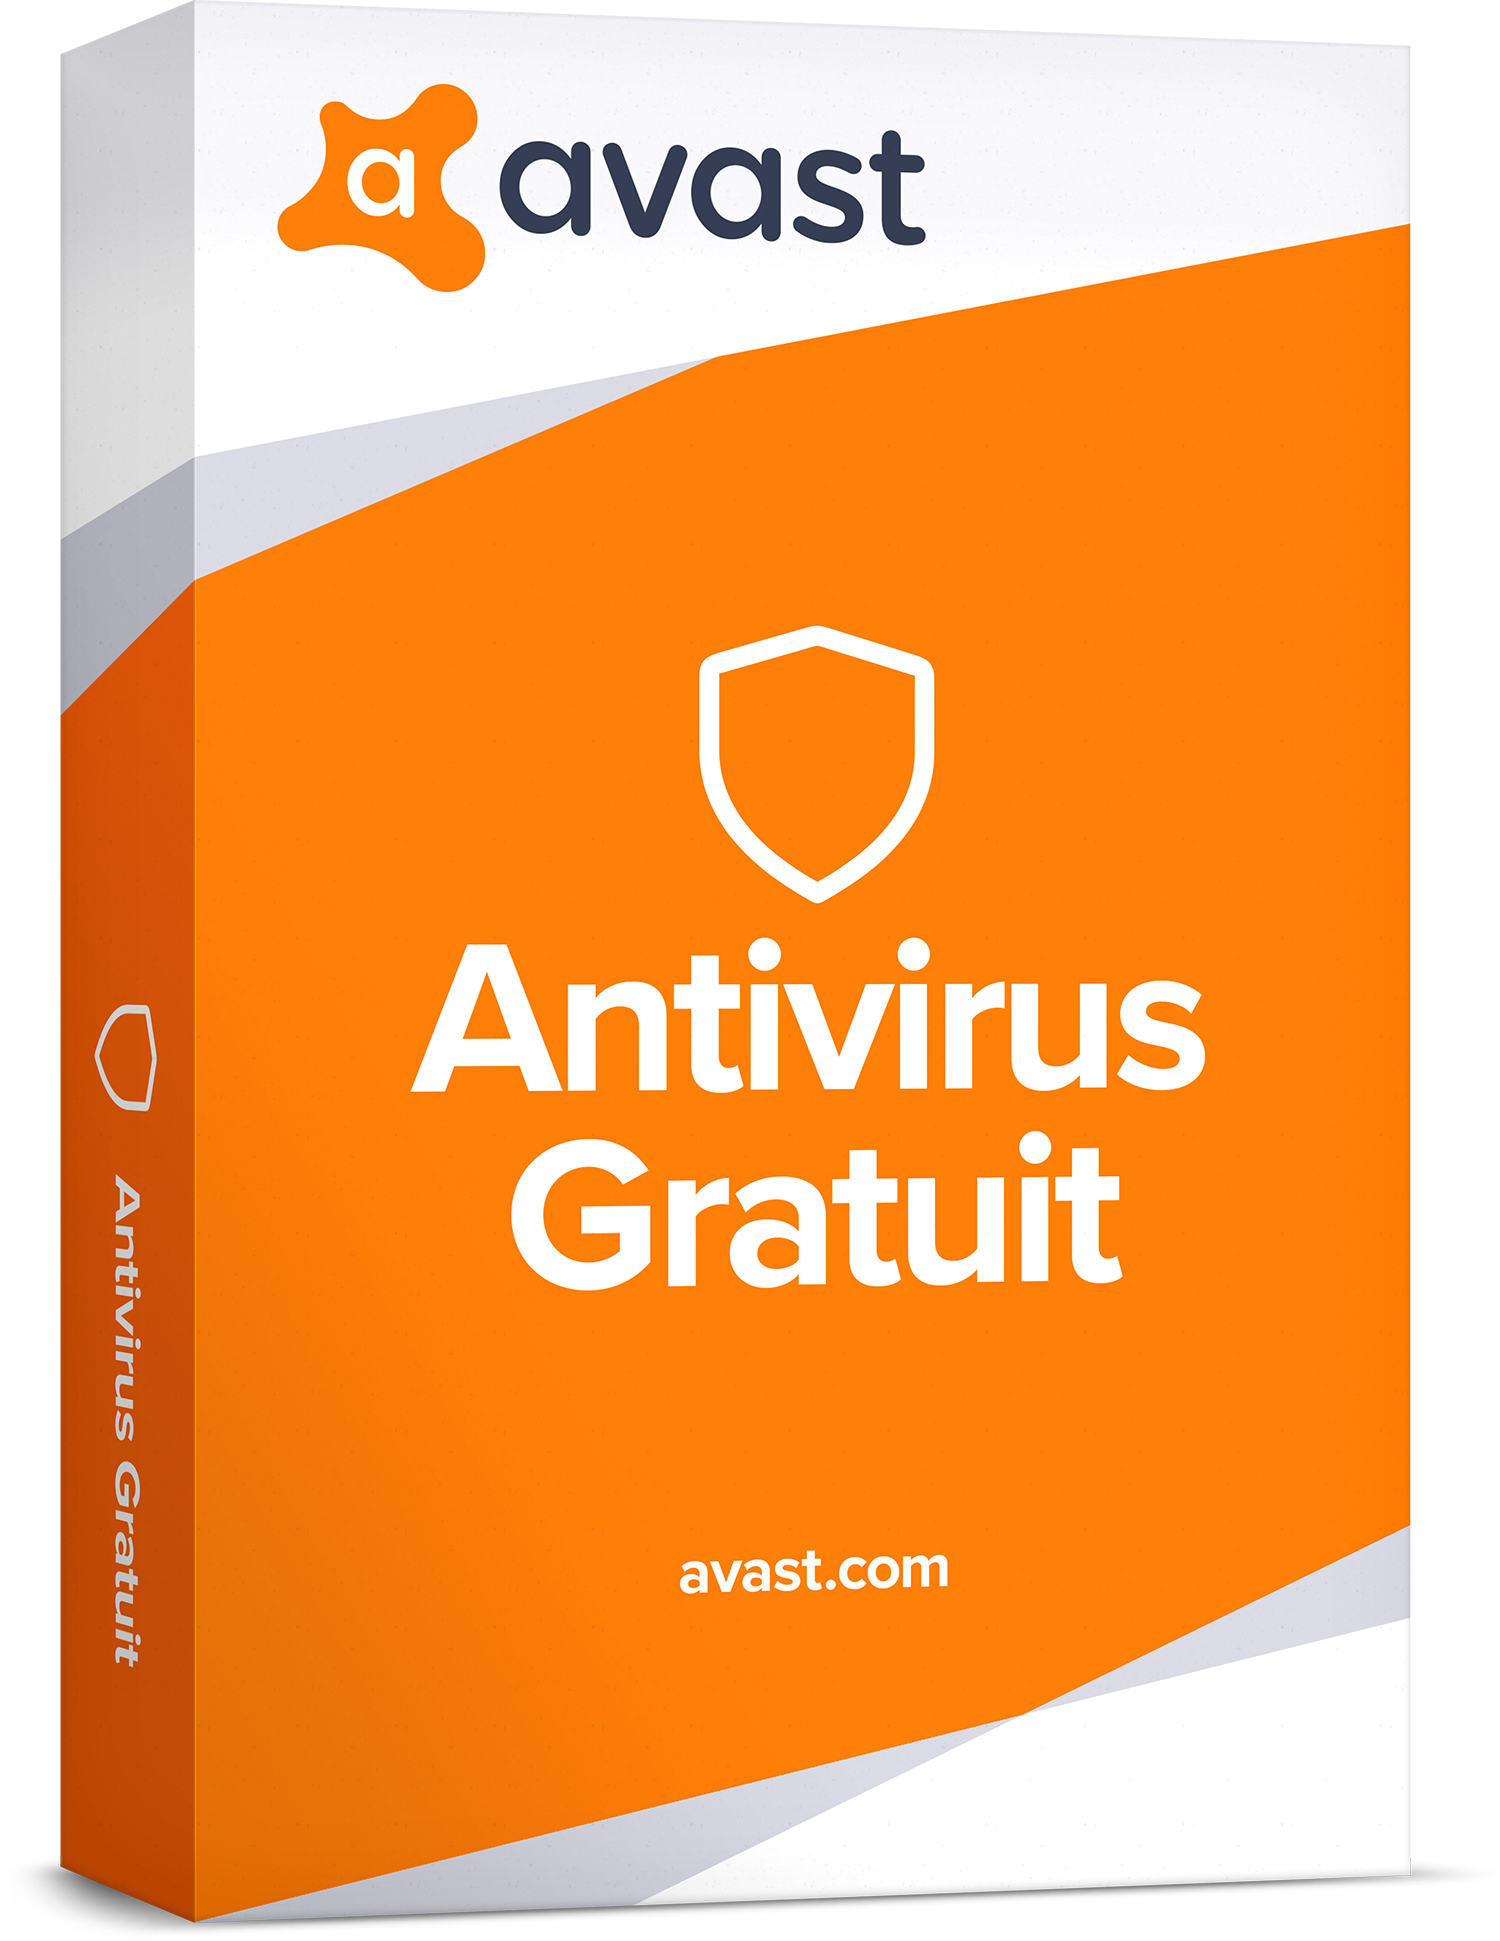 avast png